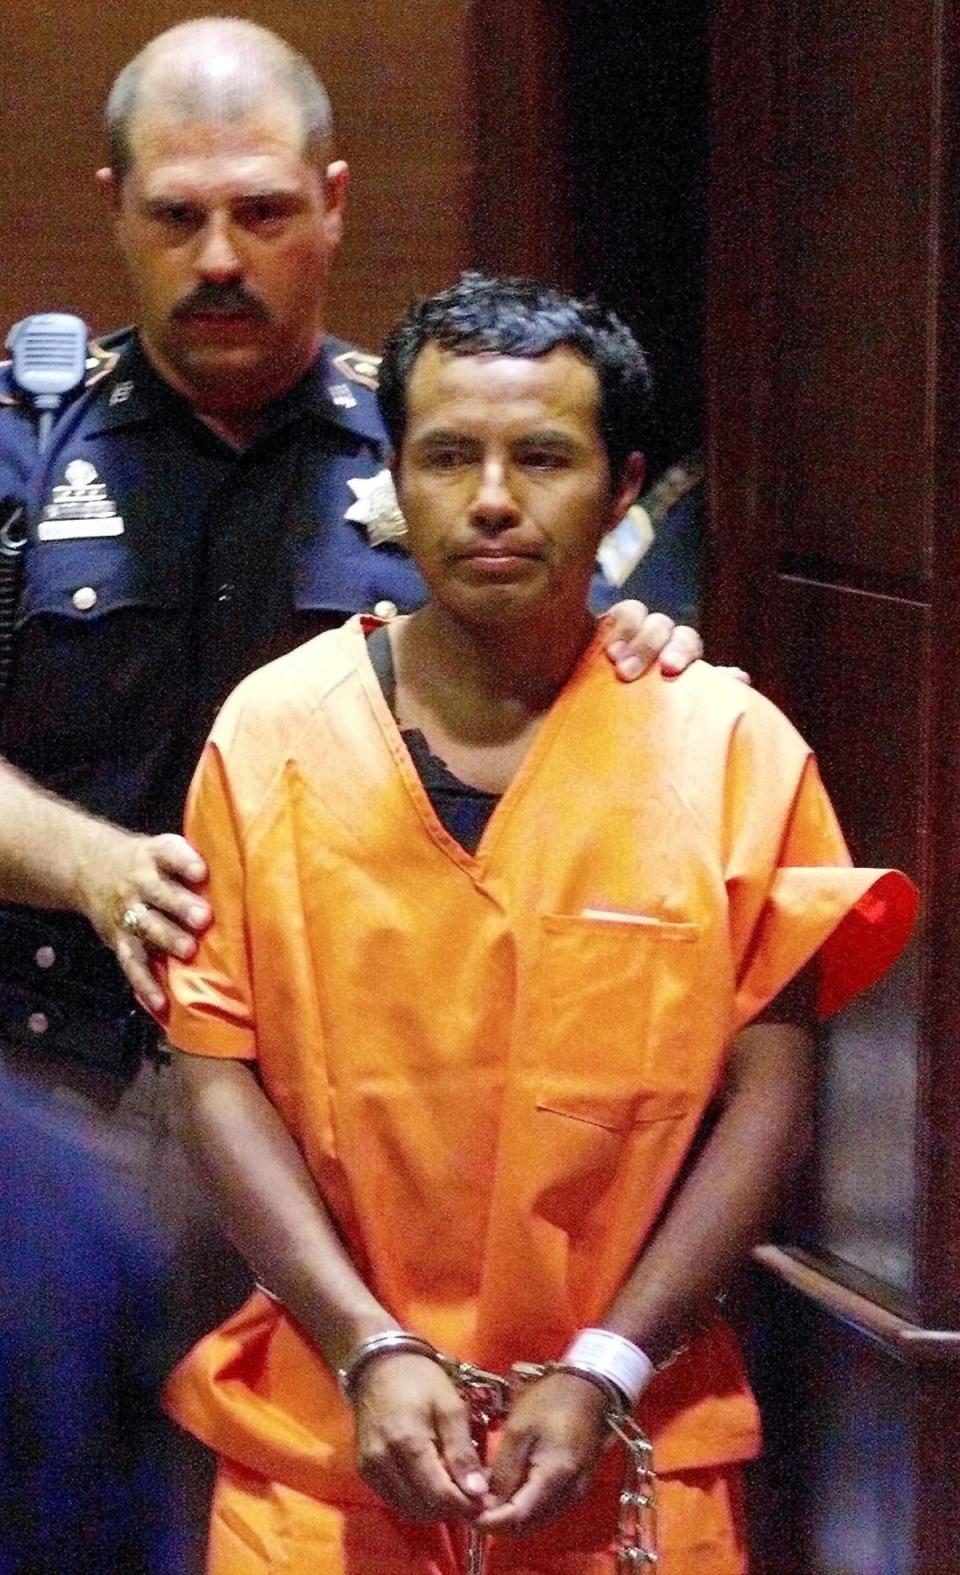 The ‘Railroad Killer’ was linked to at least 15 murders (AFP/Getty)